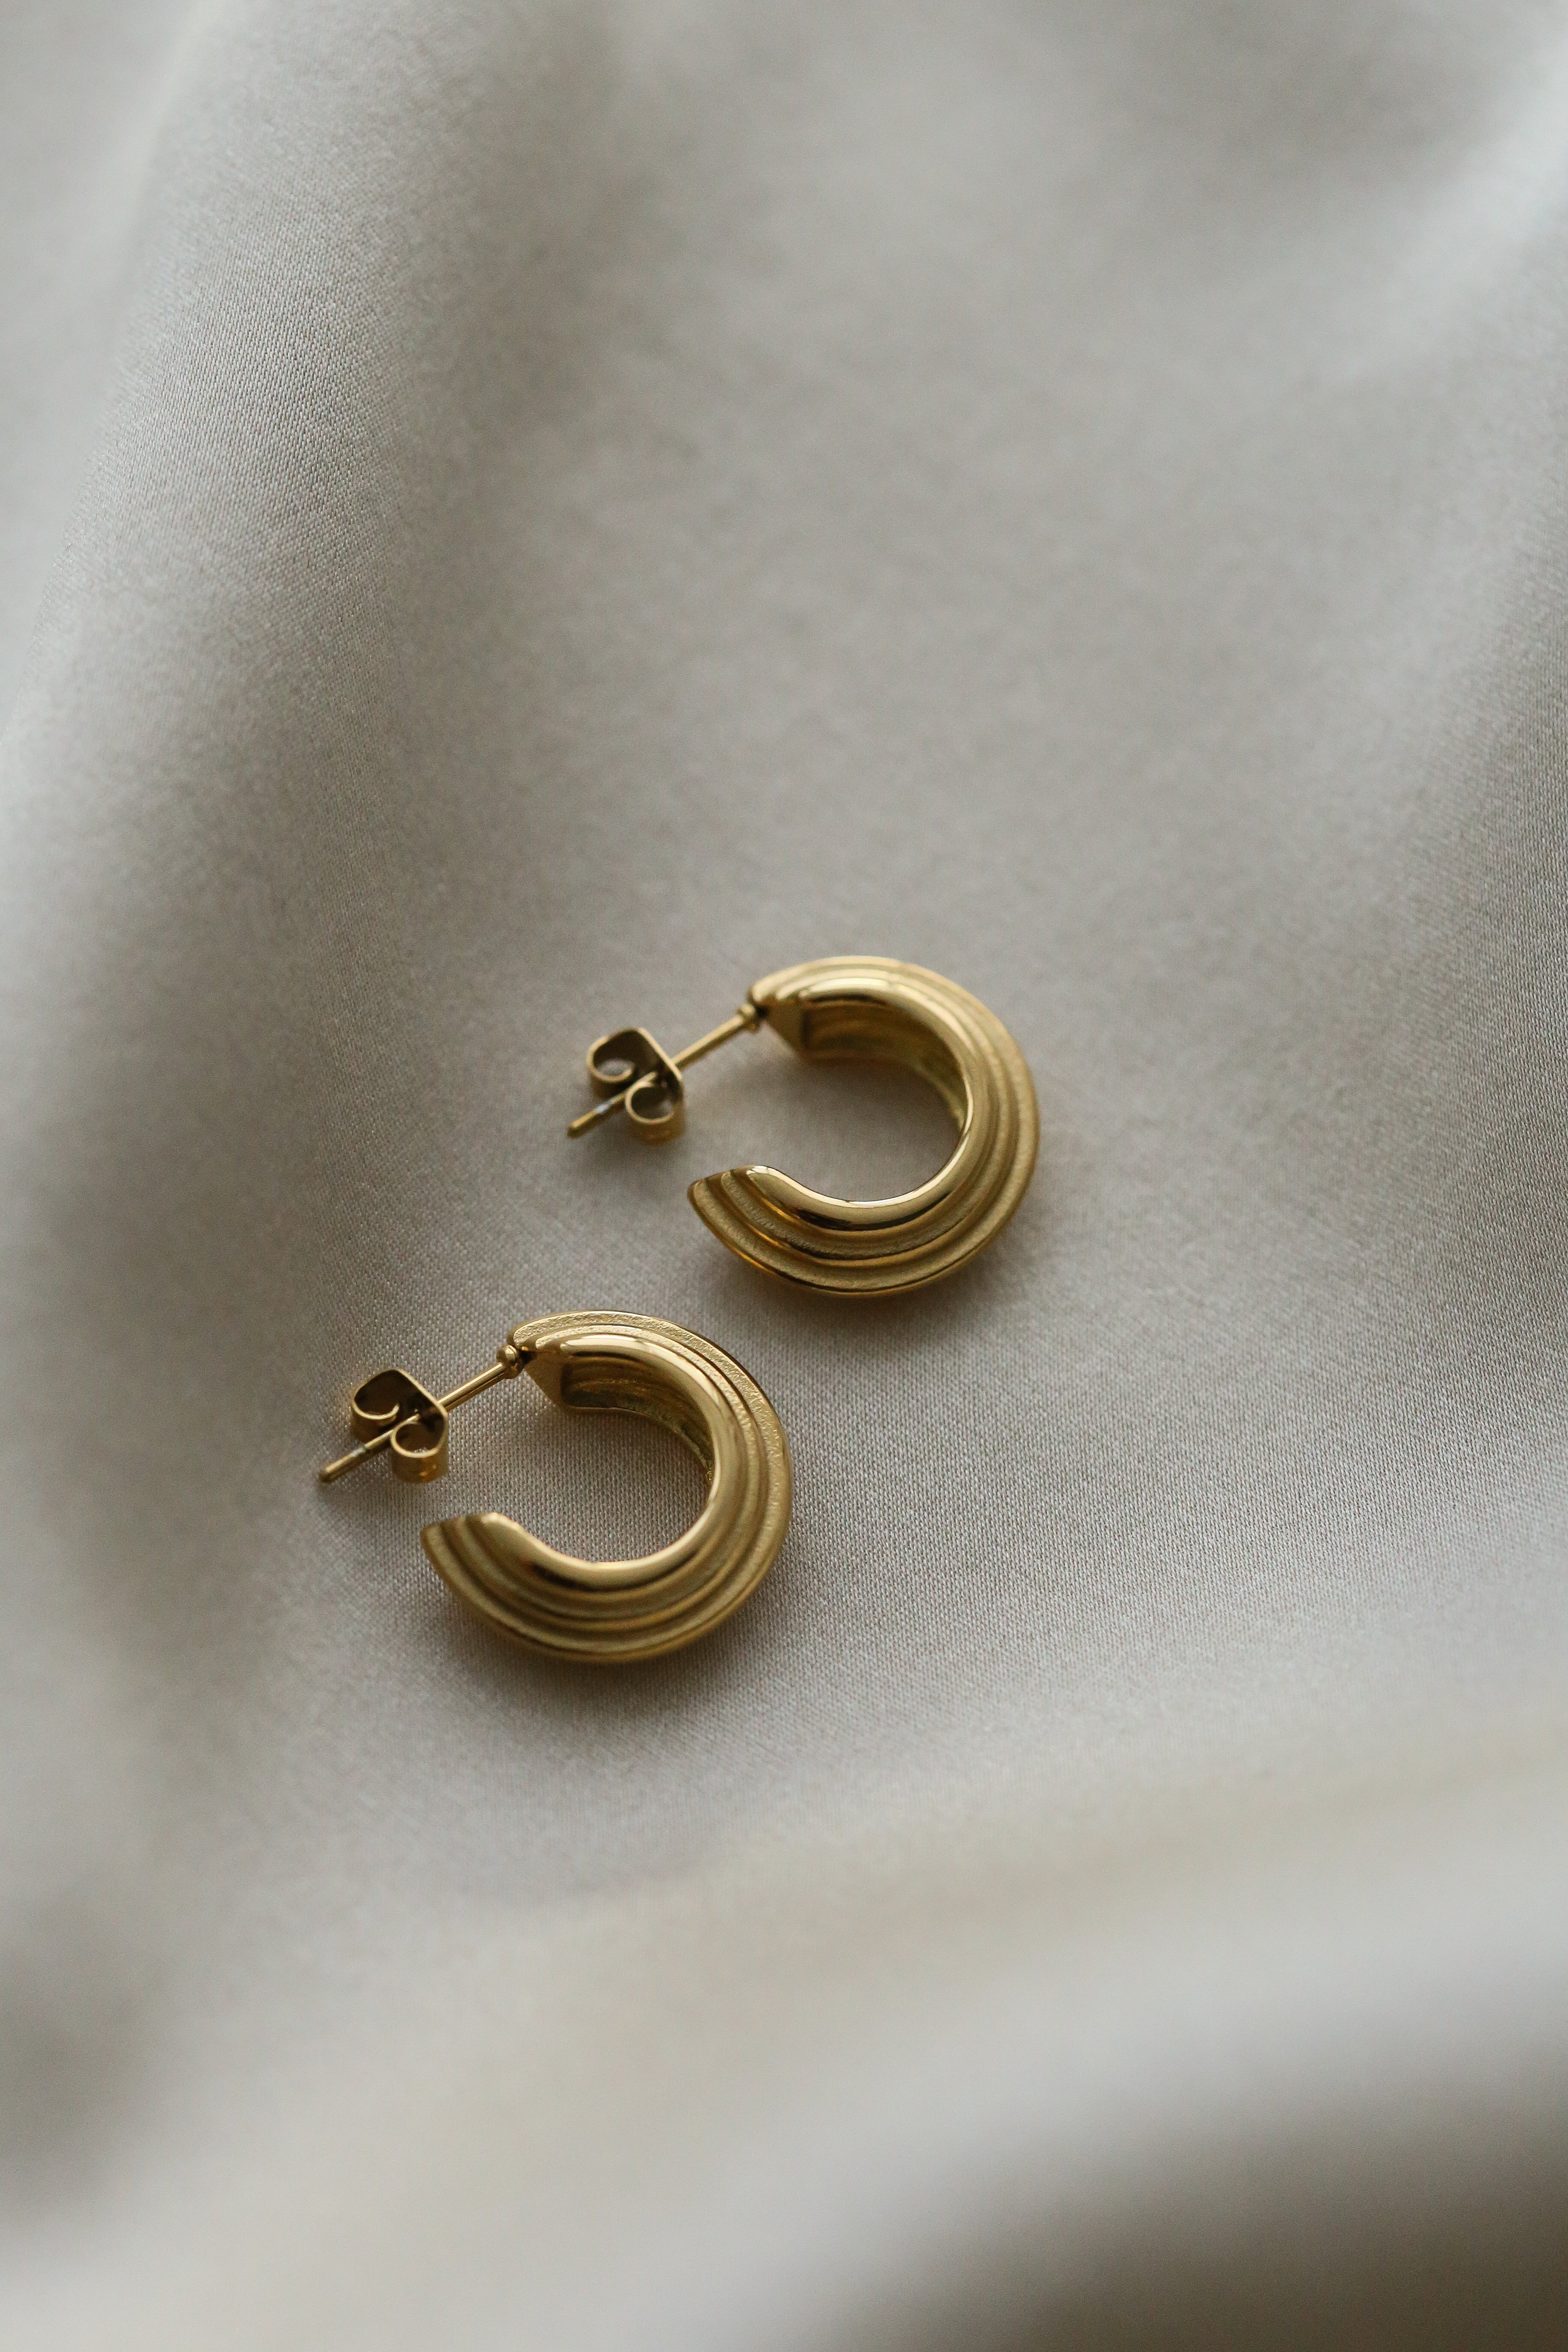 Valentina Hoops - Boutique Minimaliste has waterproof, durable, elegant and vintage inspired jewelry